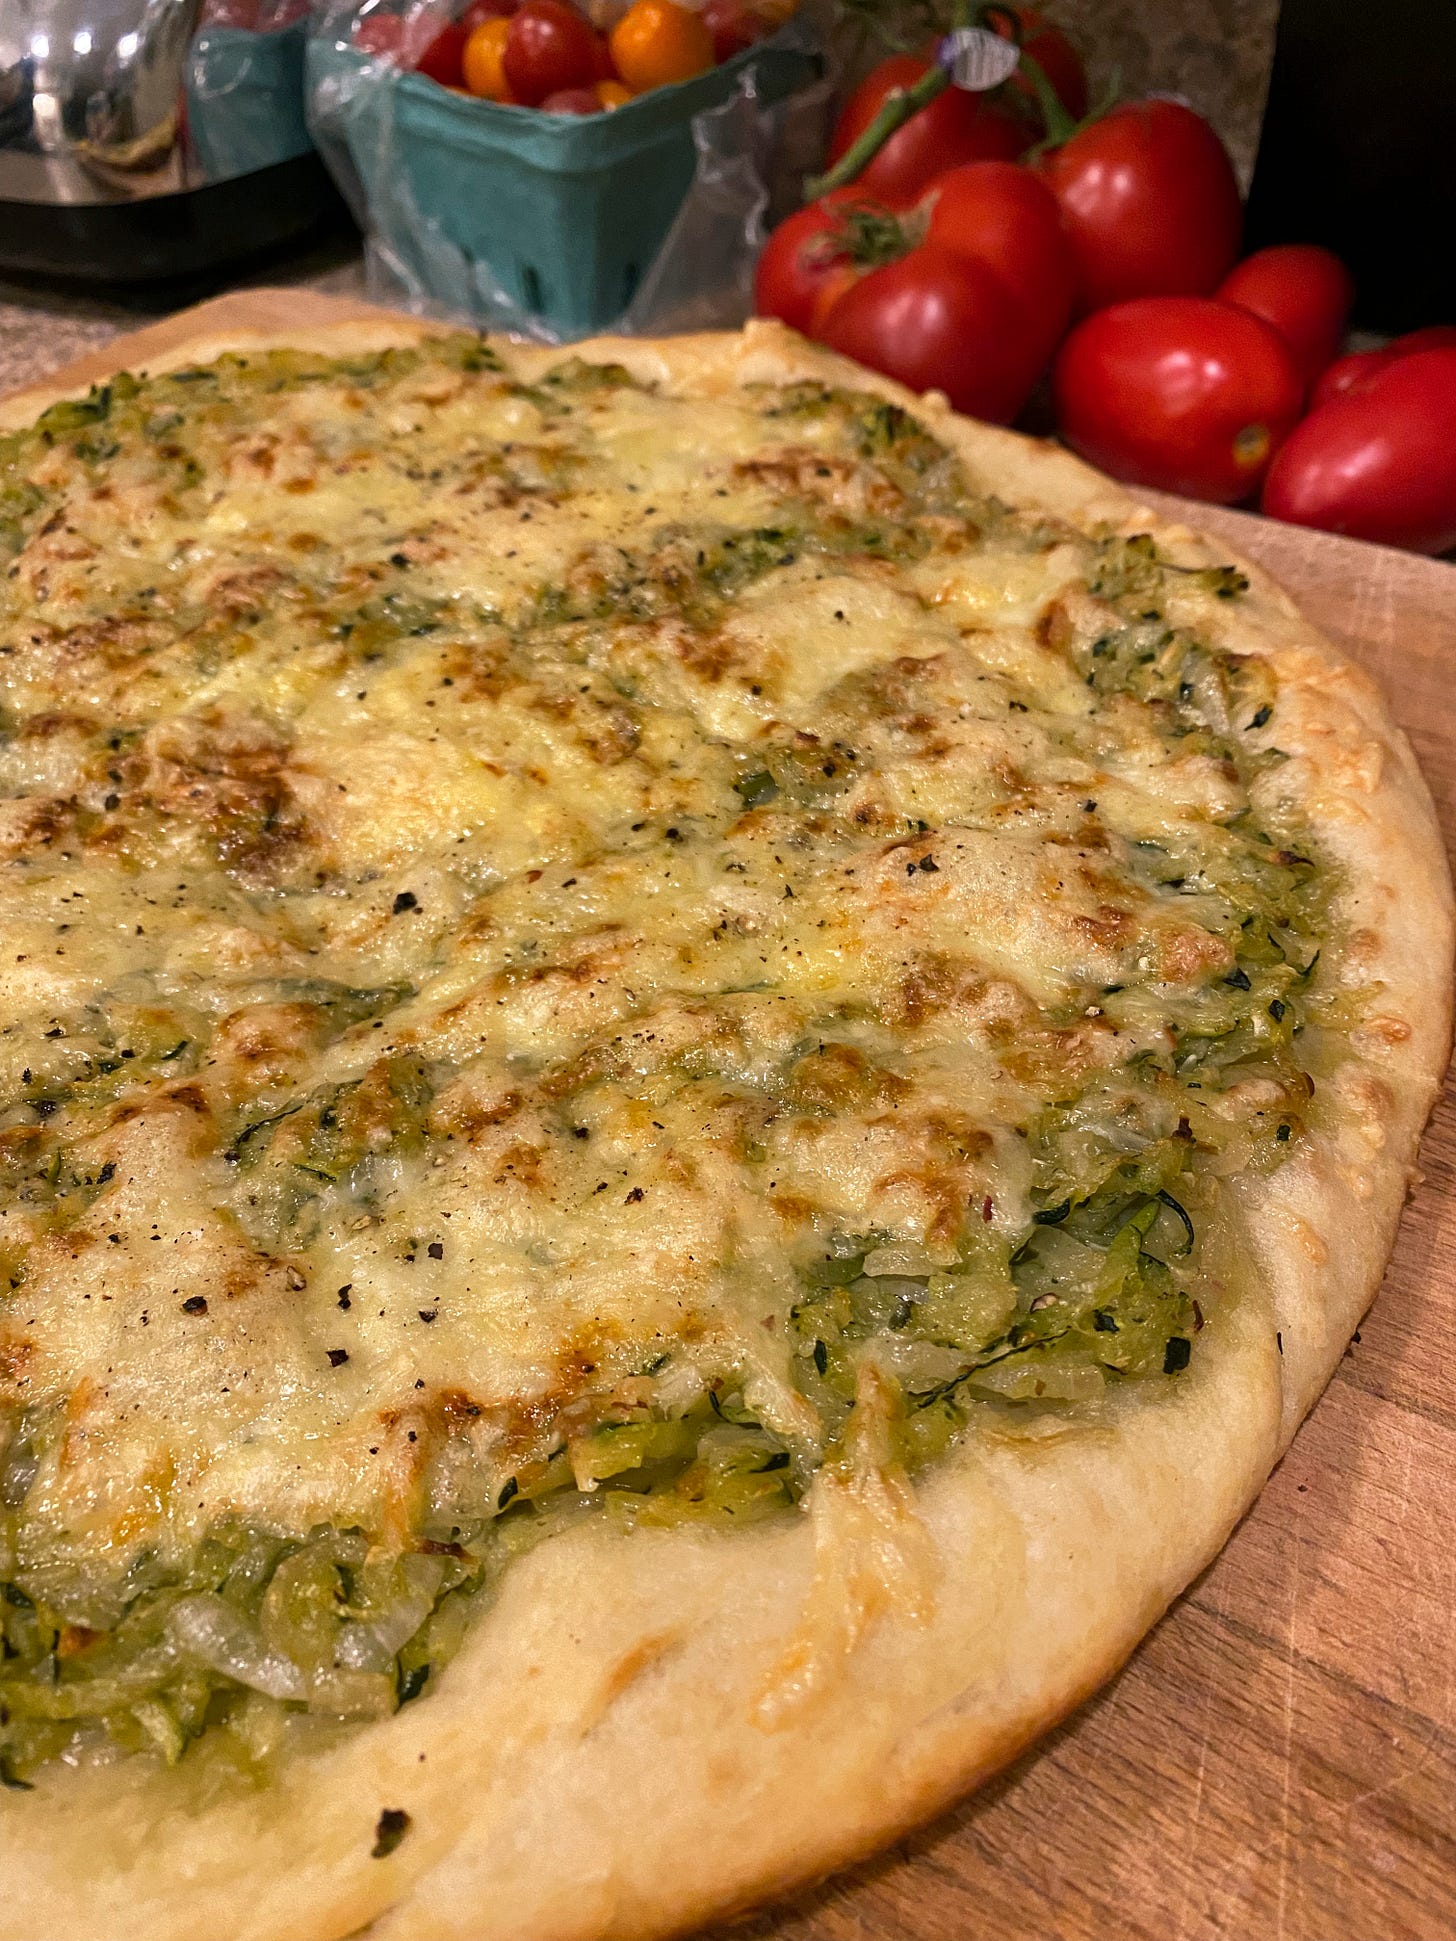 On a wooden cutting board, an unsliced pizza covered in shredded zucchini and melted, browned cheese. 